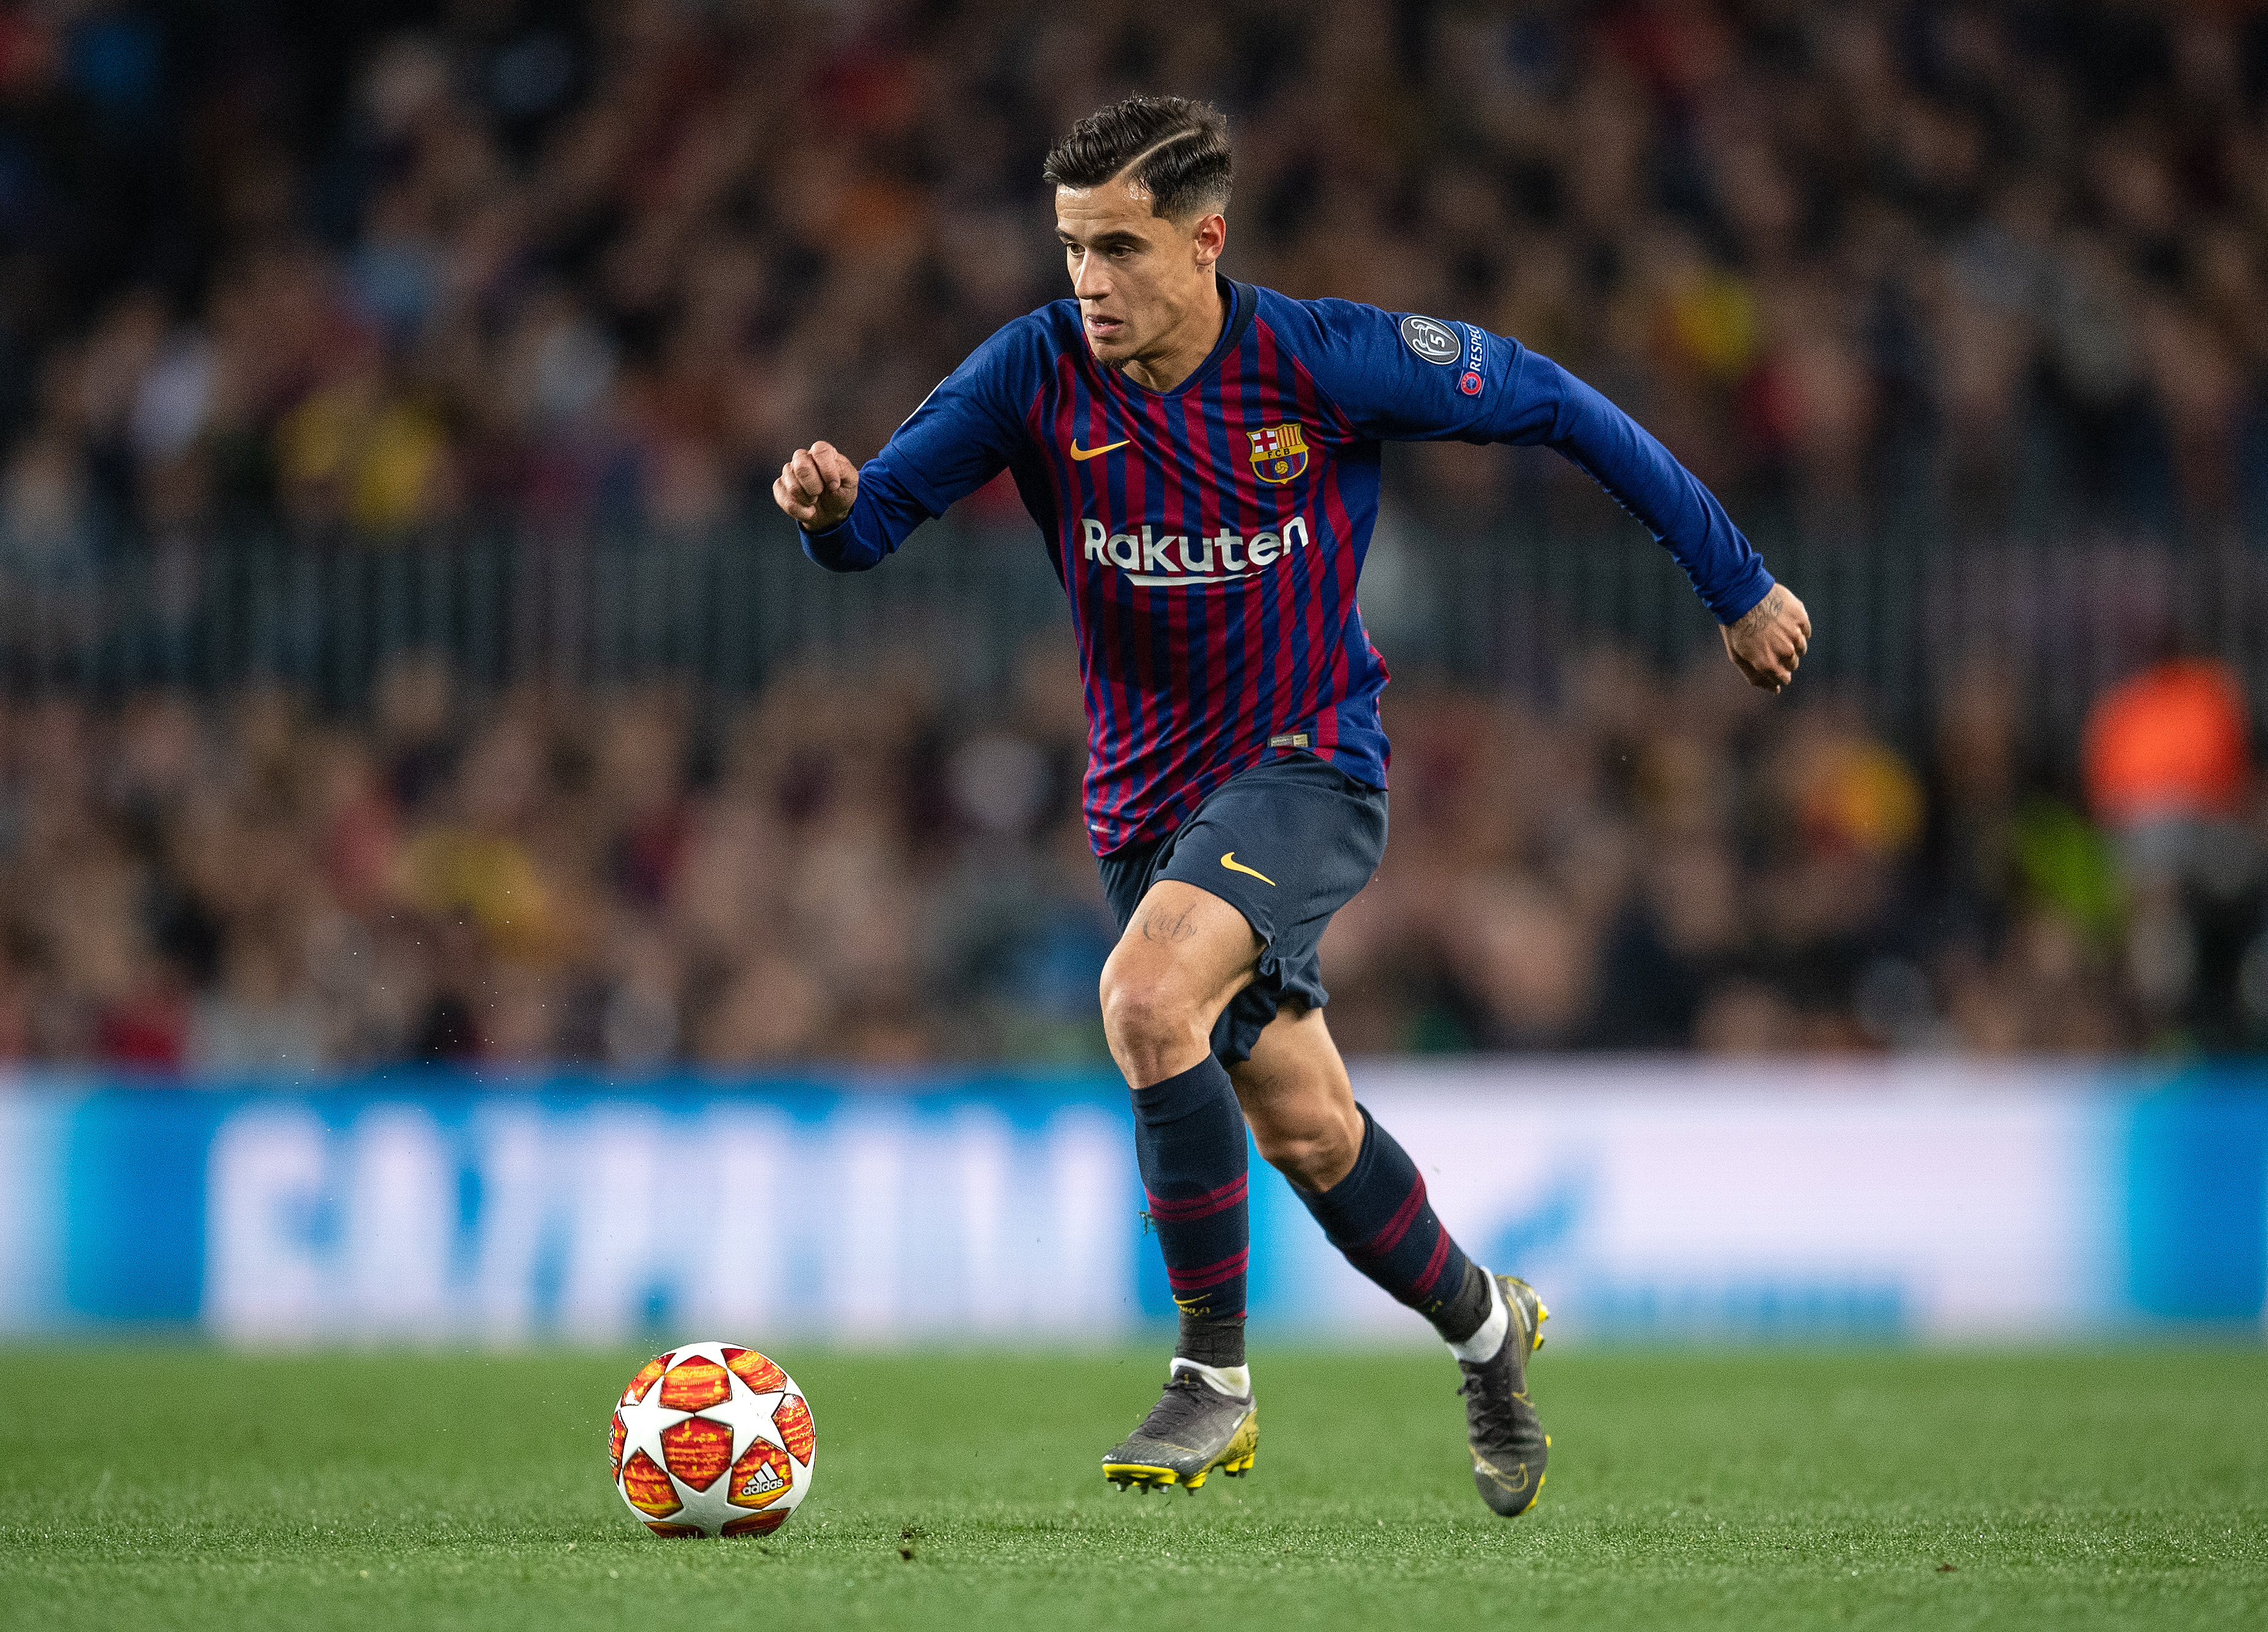 BARCELONA, SPAIN - APRIL 16: Philippe Coutinho of Barcelona controls the ball  during the UEFA Champions League Quarter Final second leg match between FC Barcelona and Manchester United at Camp Nou on April 16, 2019 in Barcelona, Spain. (Photo by Matthias Hangst/Getty Images)